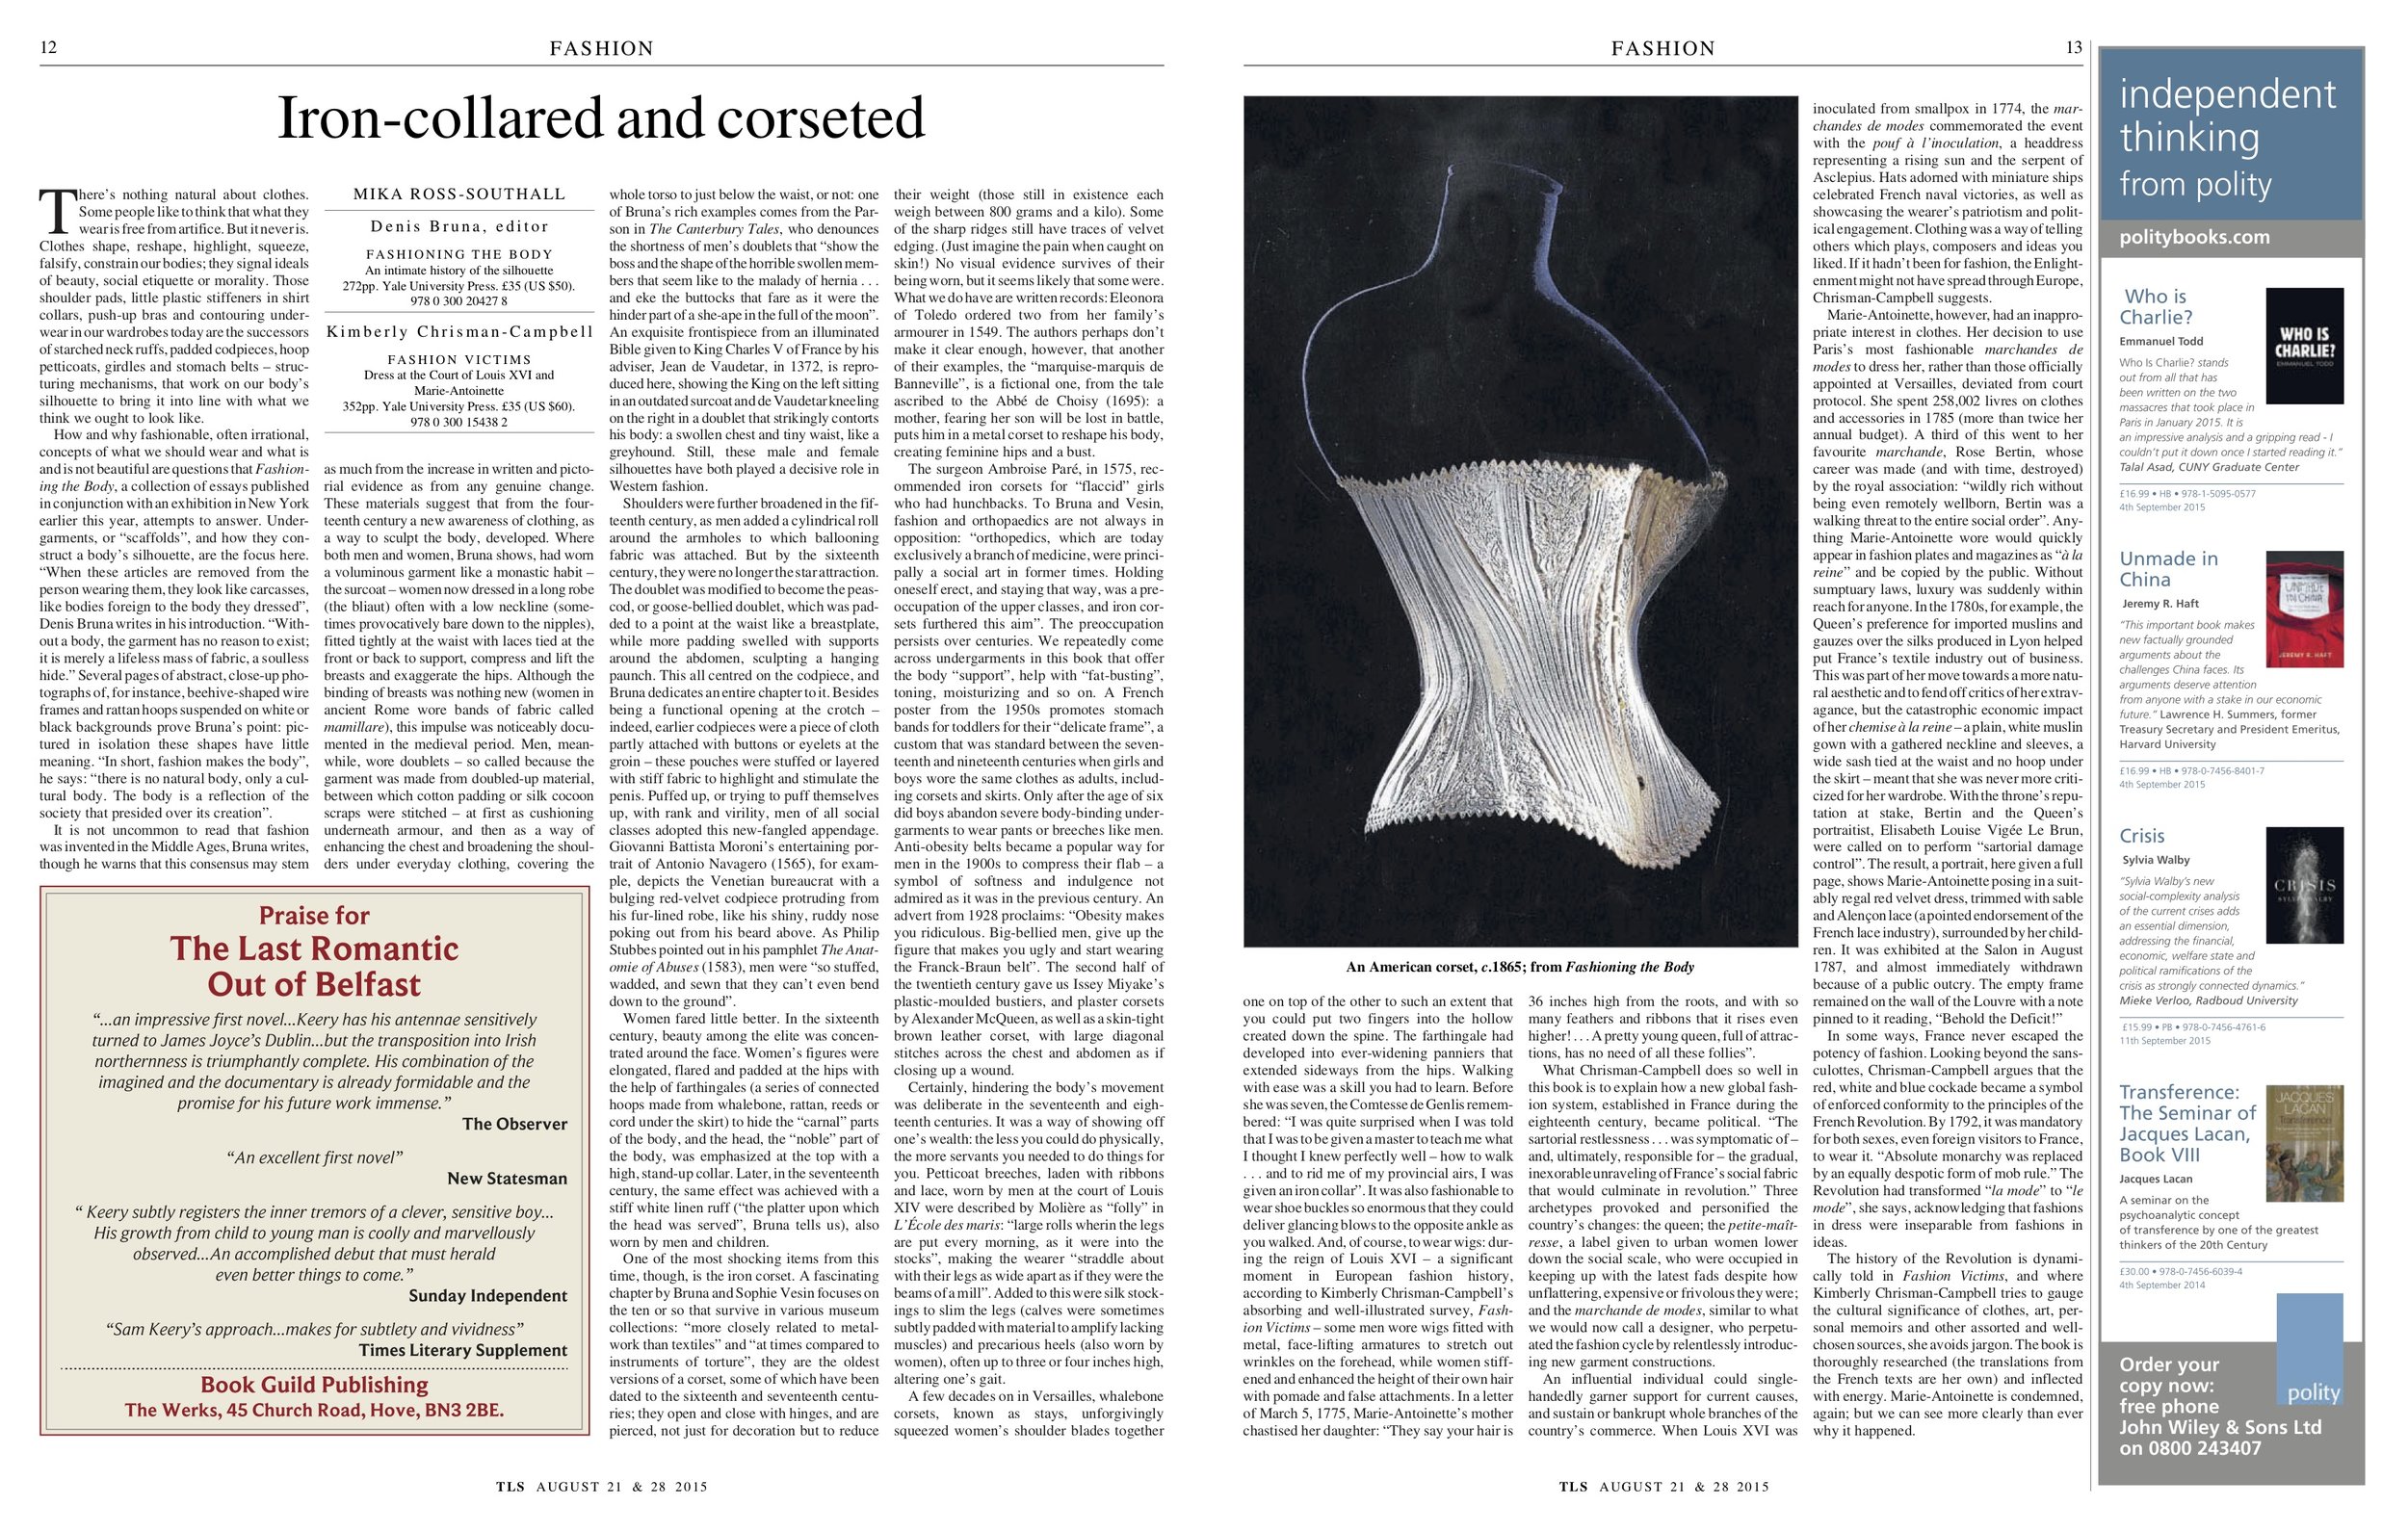 The Times Literary Supplement, 21 &amp; 28 August 2015. "Iron-collared and corseted"